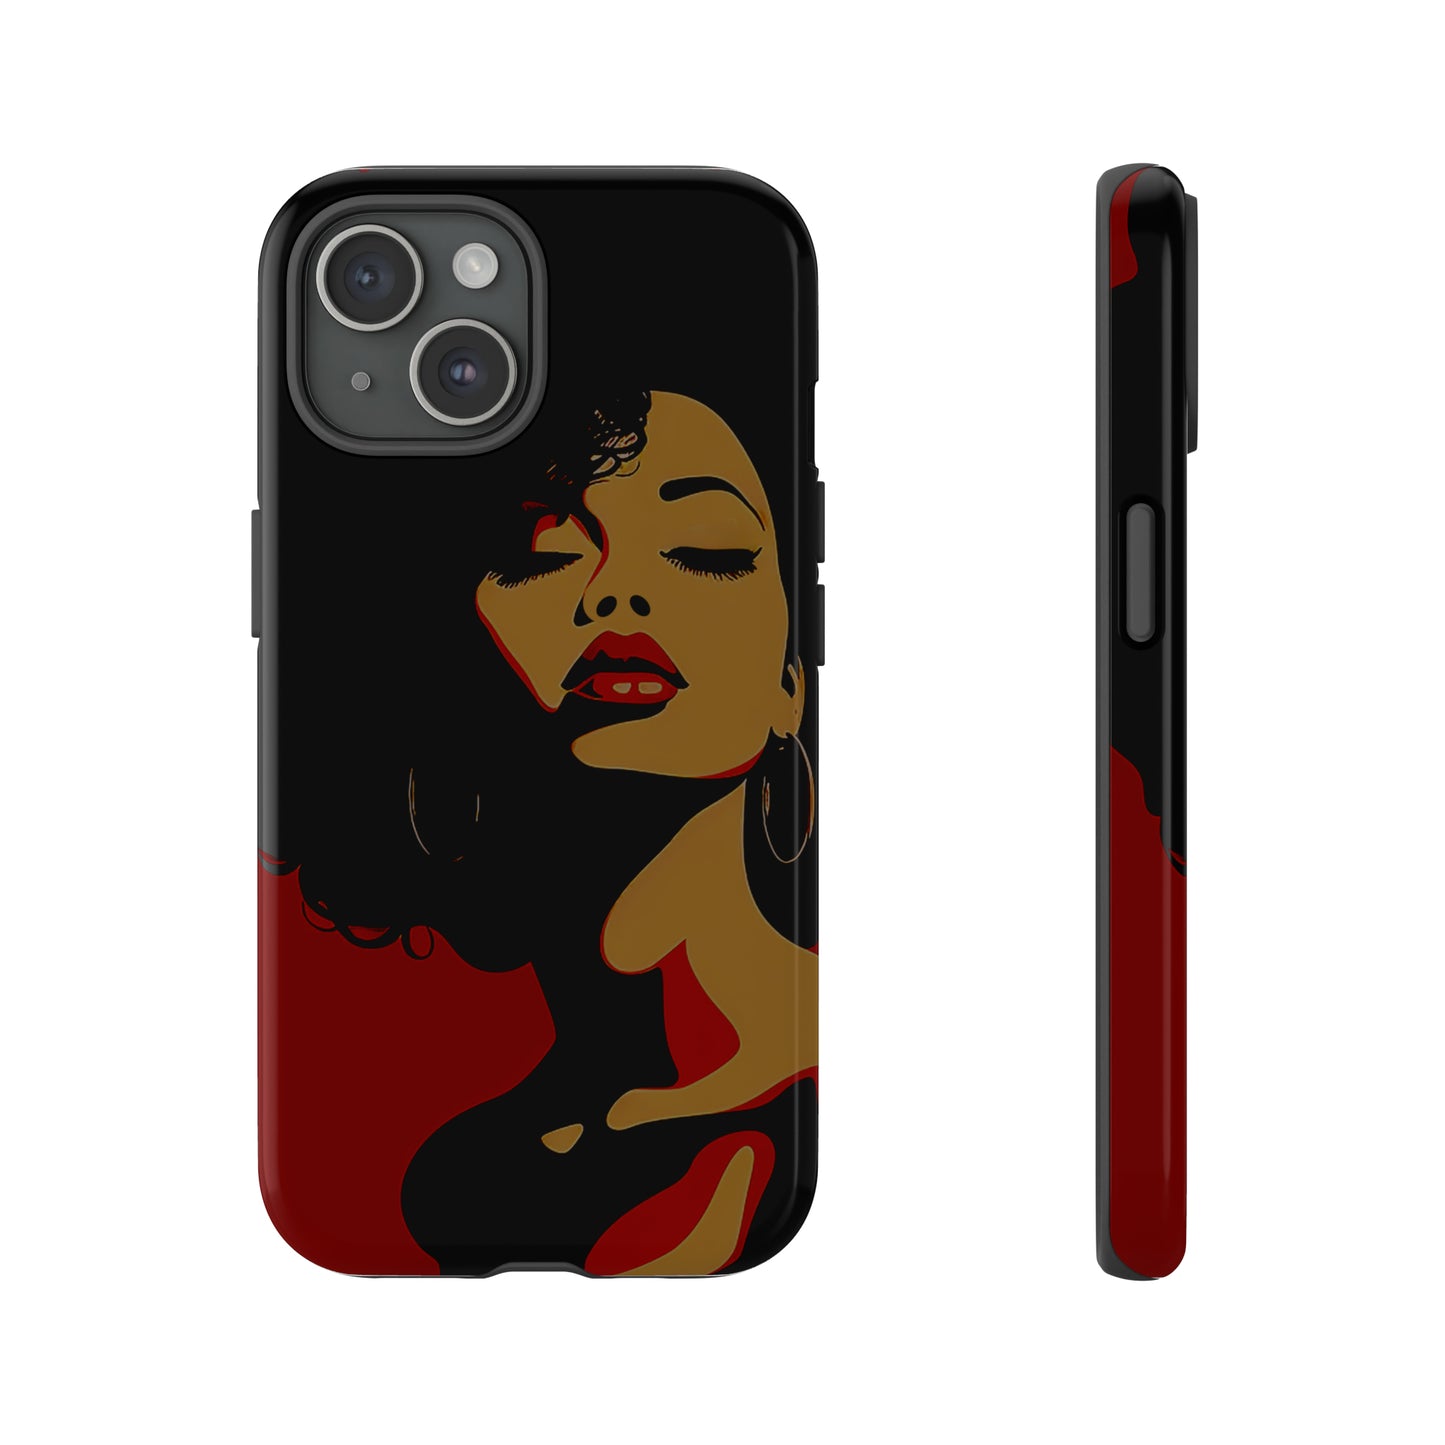 Afro Woman Phone Case